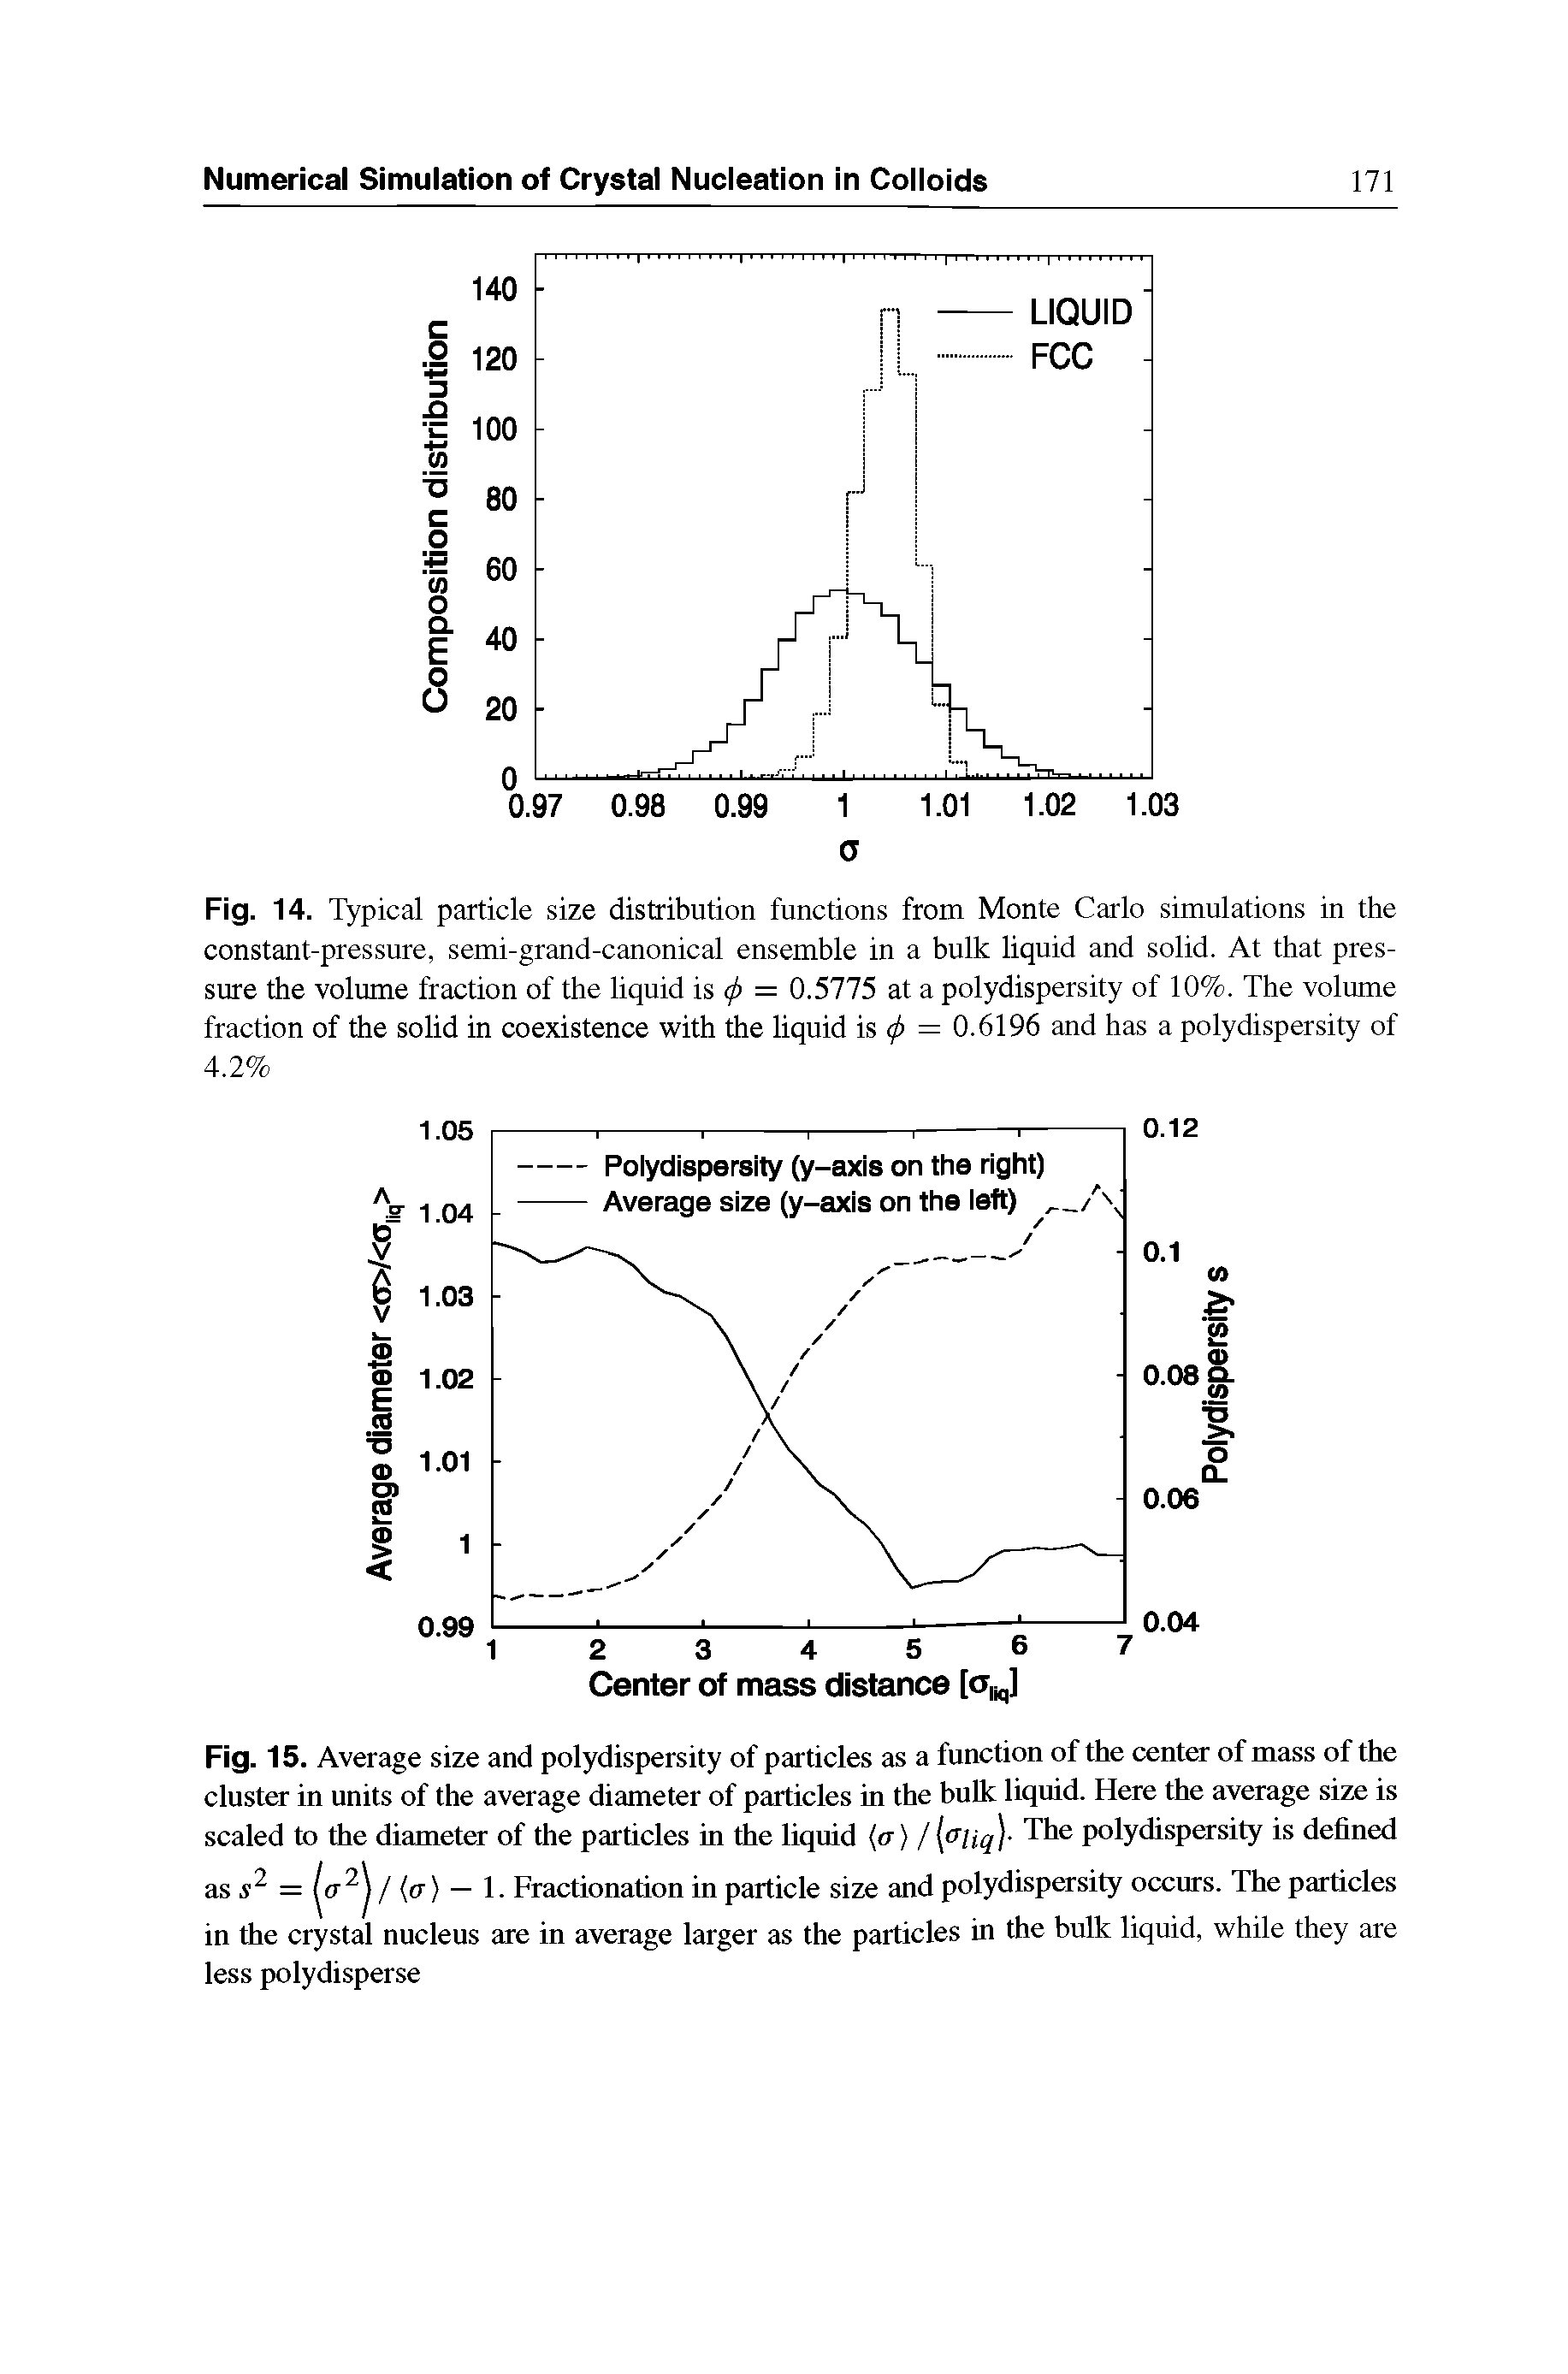 Fig. 14. Typical particle size distribution functions from Monte Carlo simulations in the constant-pressure, semi-grand-canonical ensemble in a bulk liquid and solid. At that pressure the volume fraction of the liquid is = 0.5775 at a polydispersity of 10%. The volume fraction of the solid in coexistence with the liquid is = 0.6196 and has a polydispersity of 4.2%...